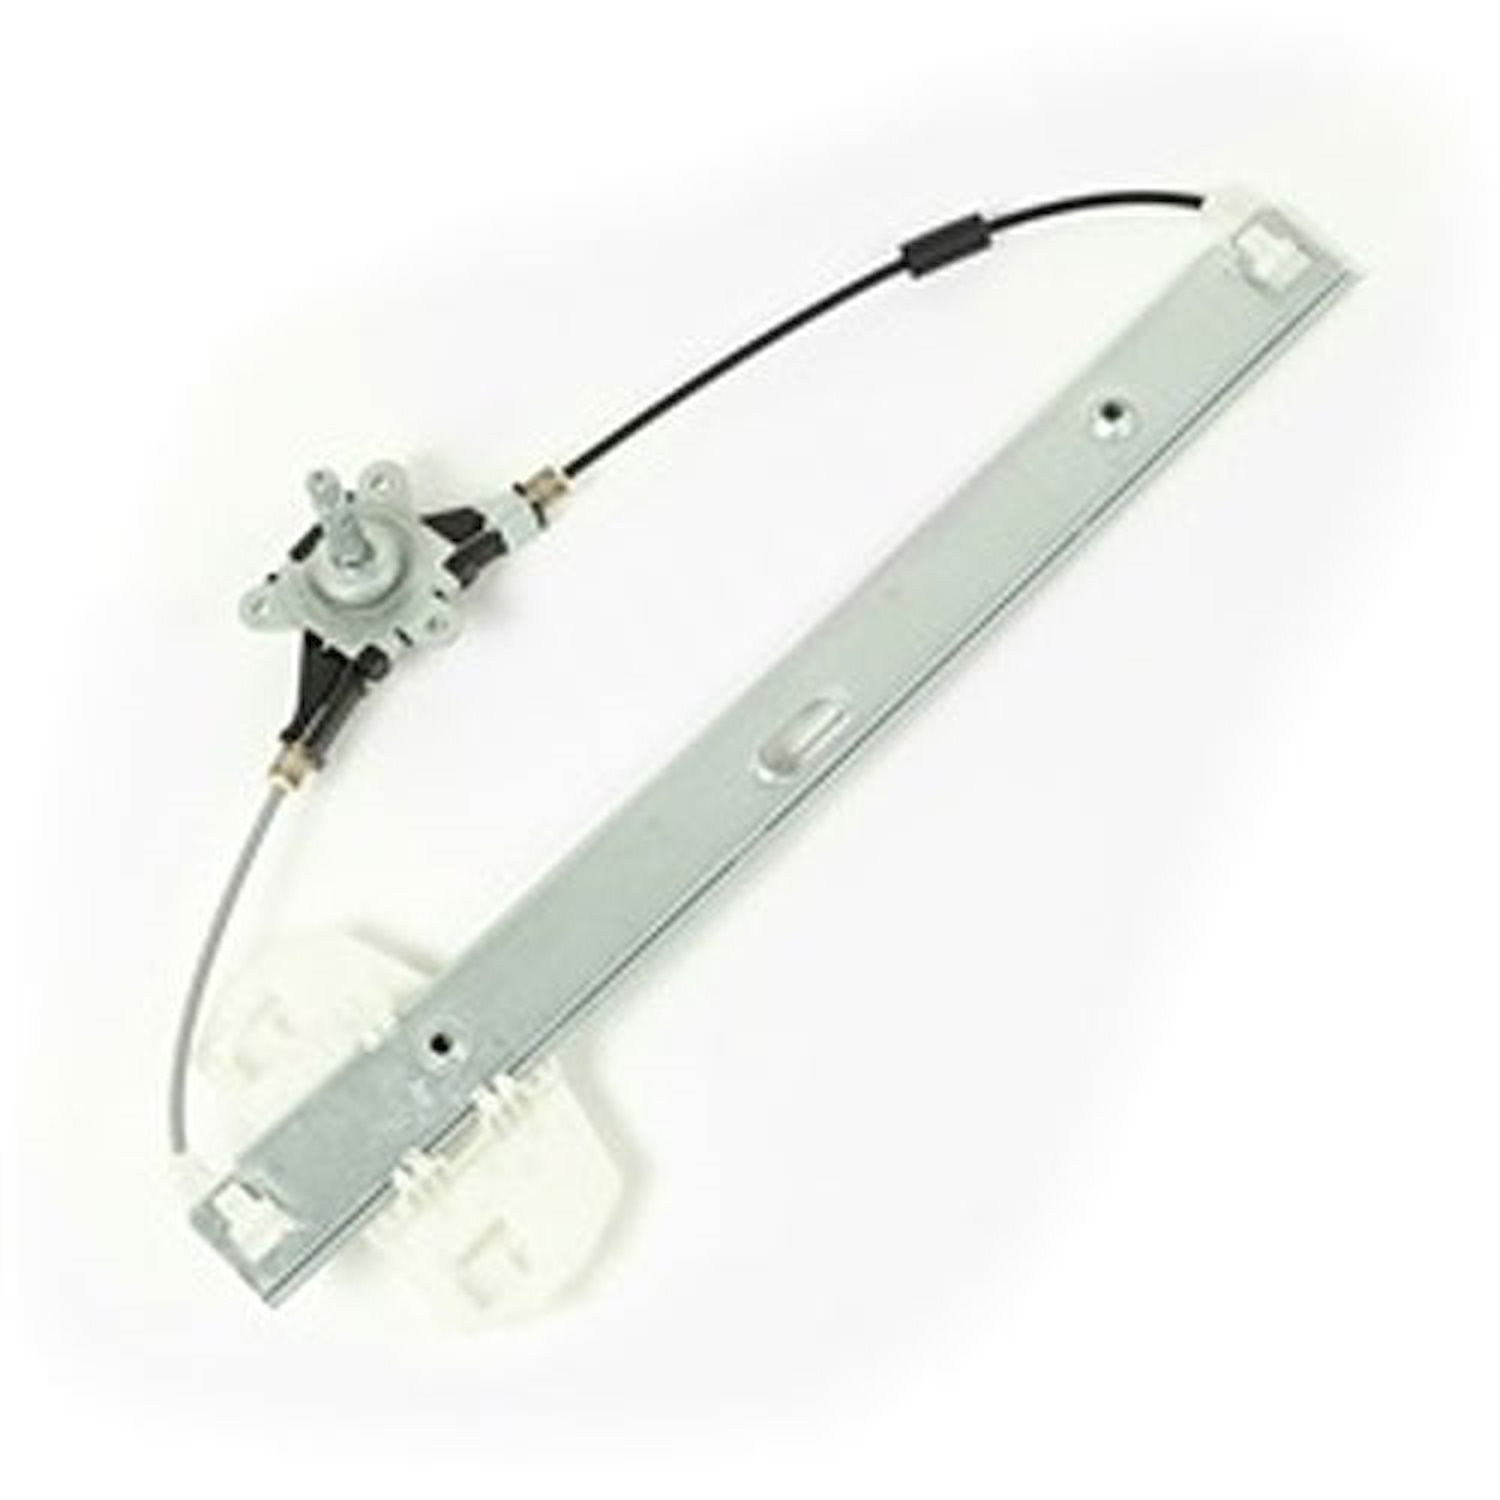 This left front manual window regulator from Omix-ADA fits 07-16 Jeep Wranglers with full doors.